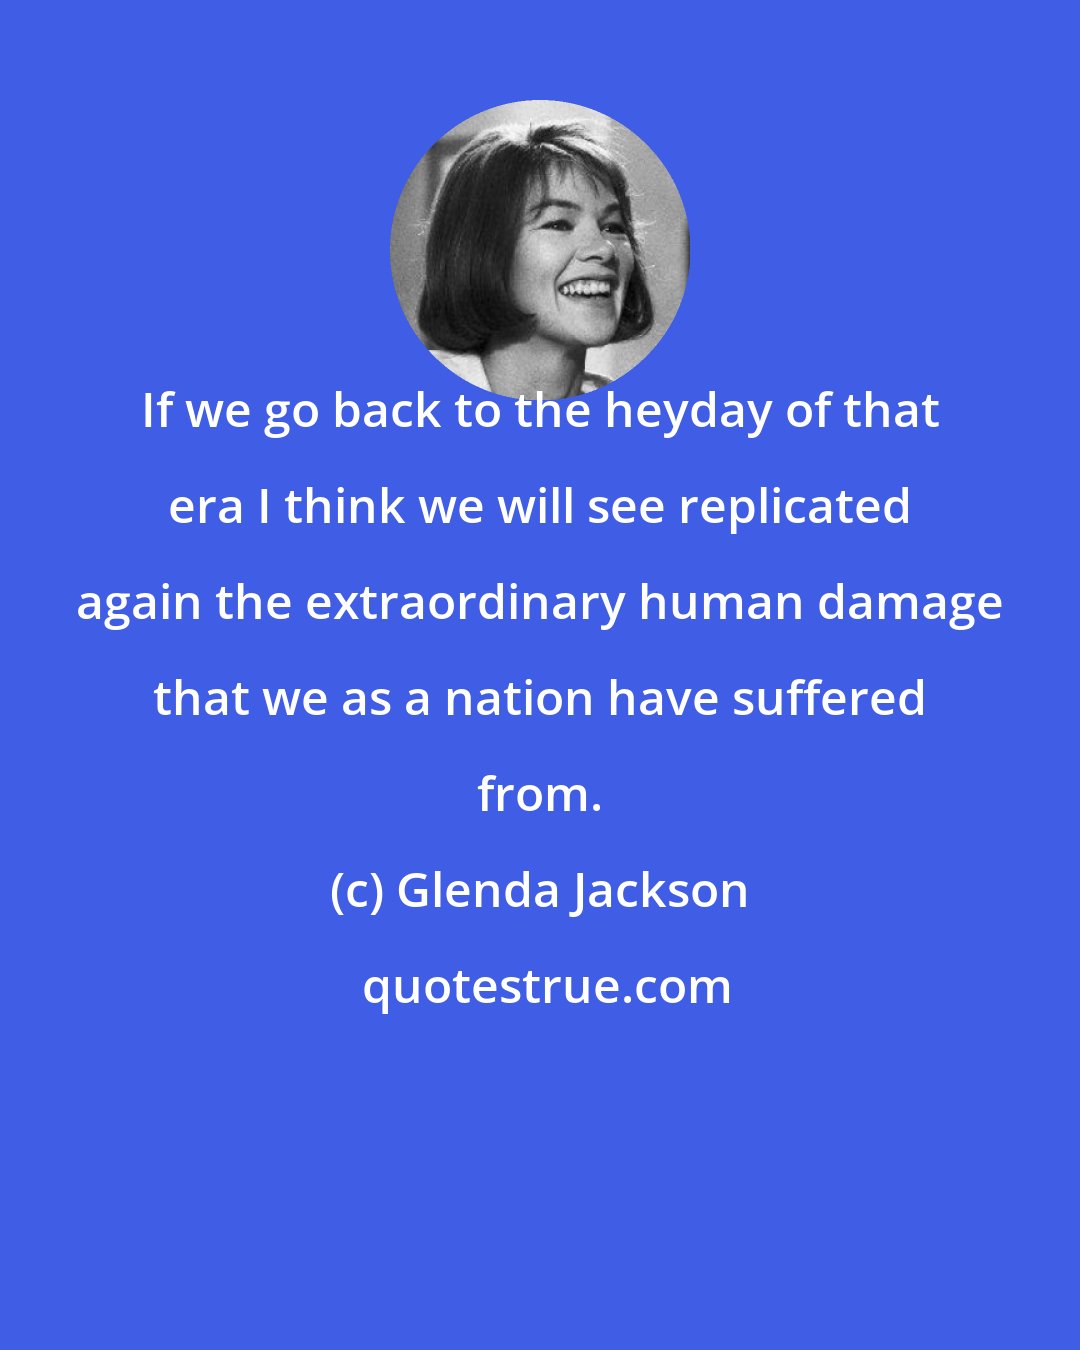 Glenda Jackson: If we go back to the heyday of that era I think we will see replicated again the extraordinary human damage that we as a nation have suffered from.